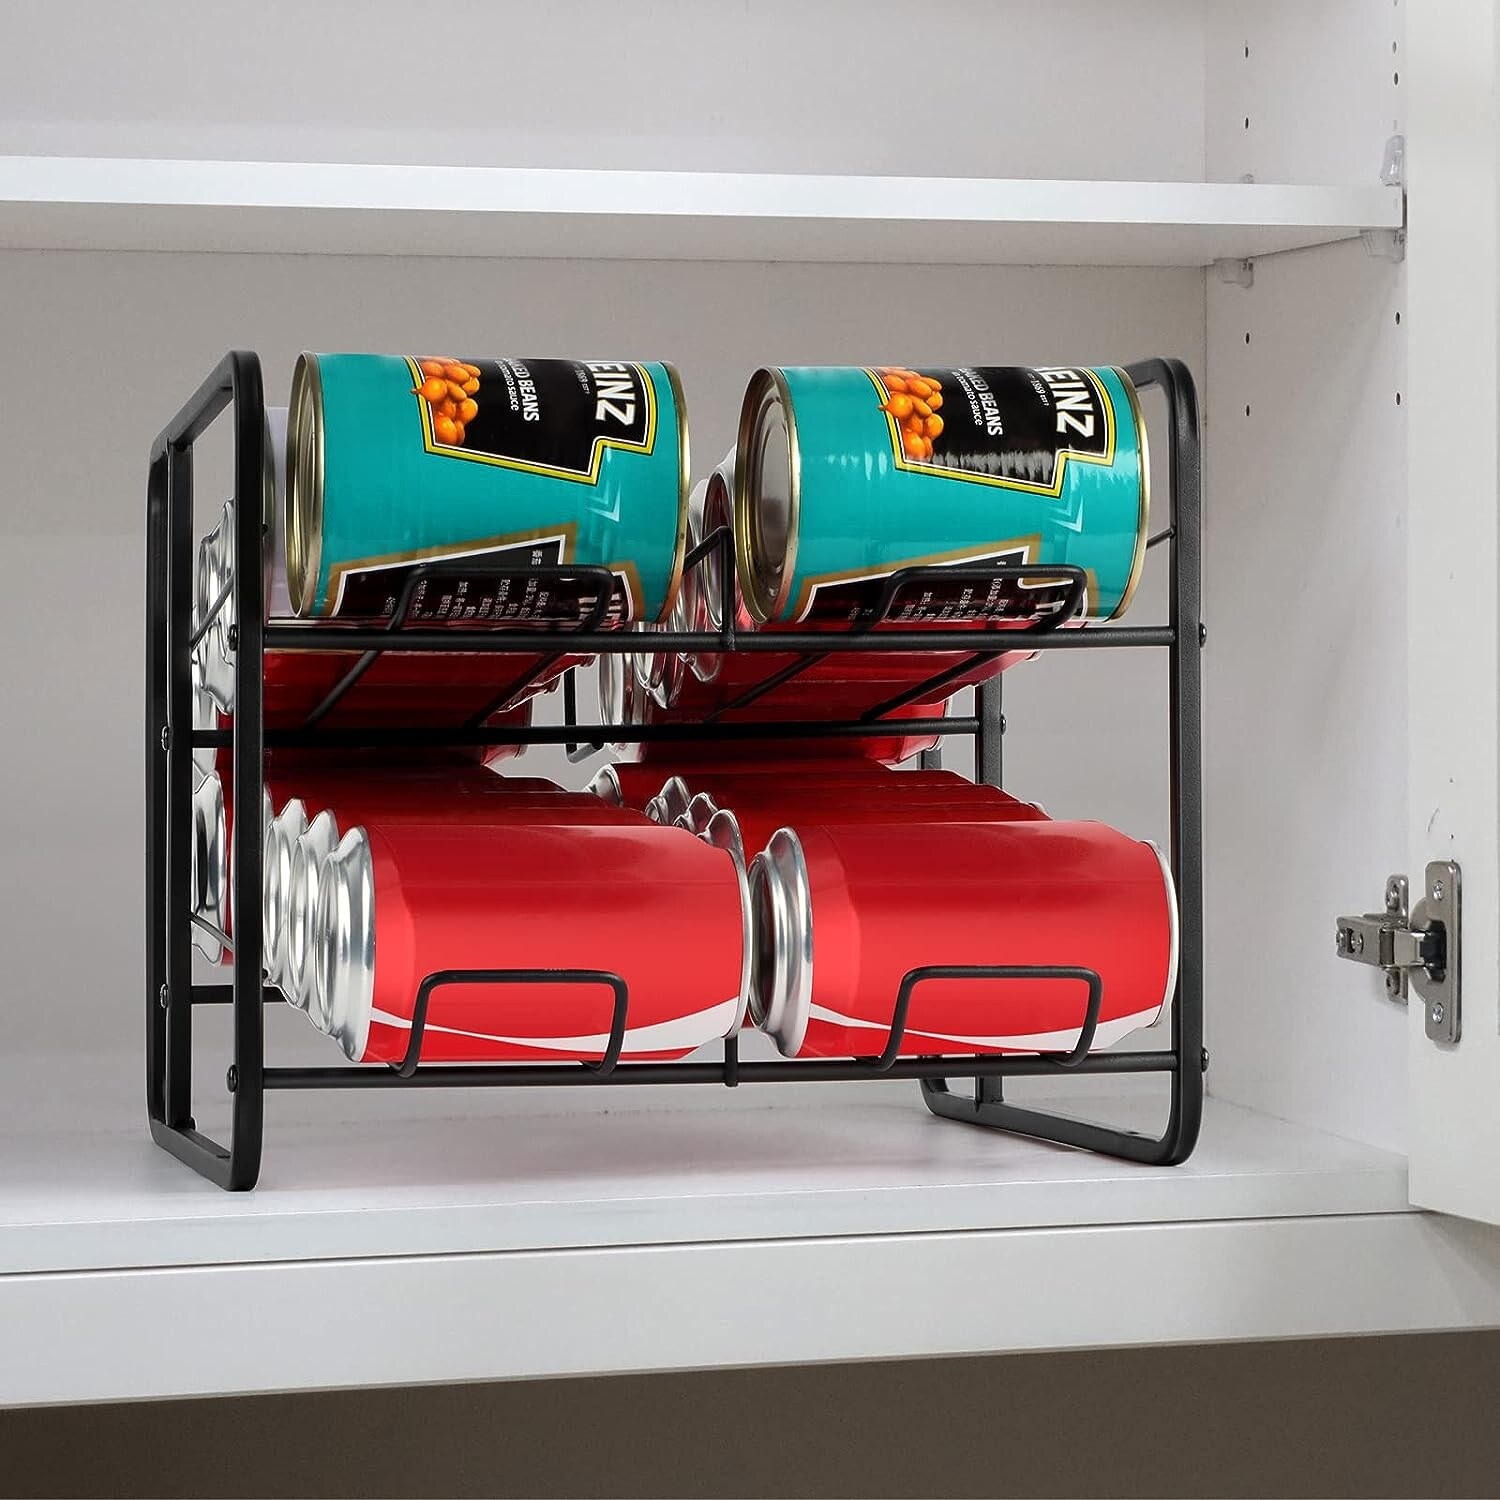 Soda Can Organizer for Pantry - Bed Bath & Beyond - 38443167